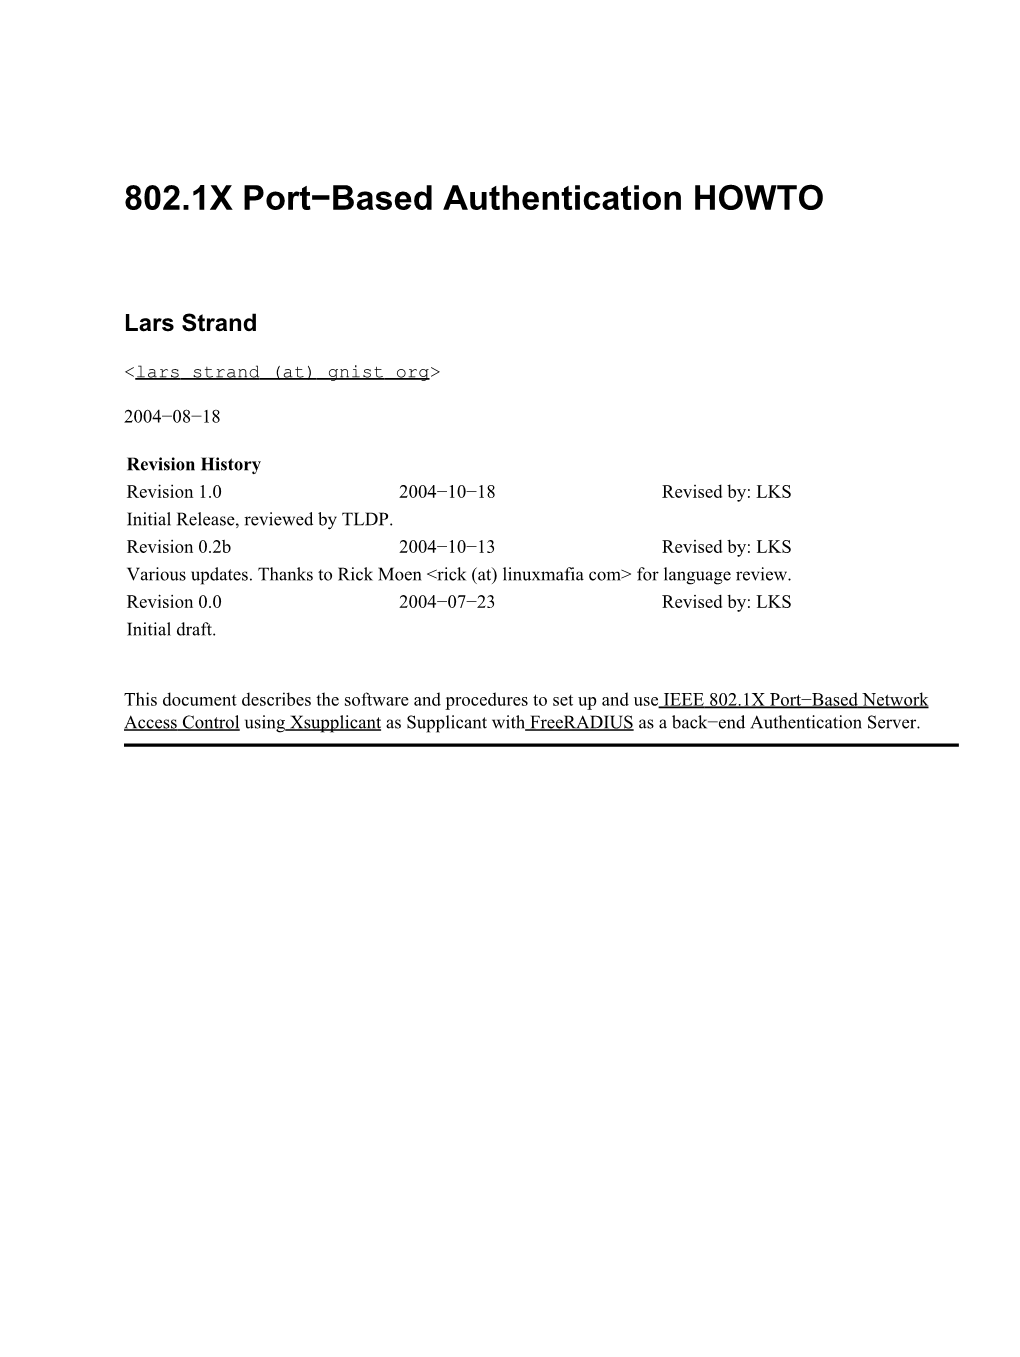 802.1X Port-Based Authentication HOWTO